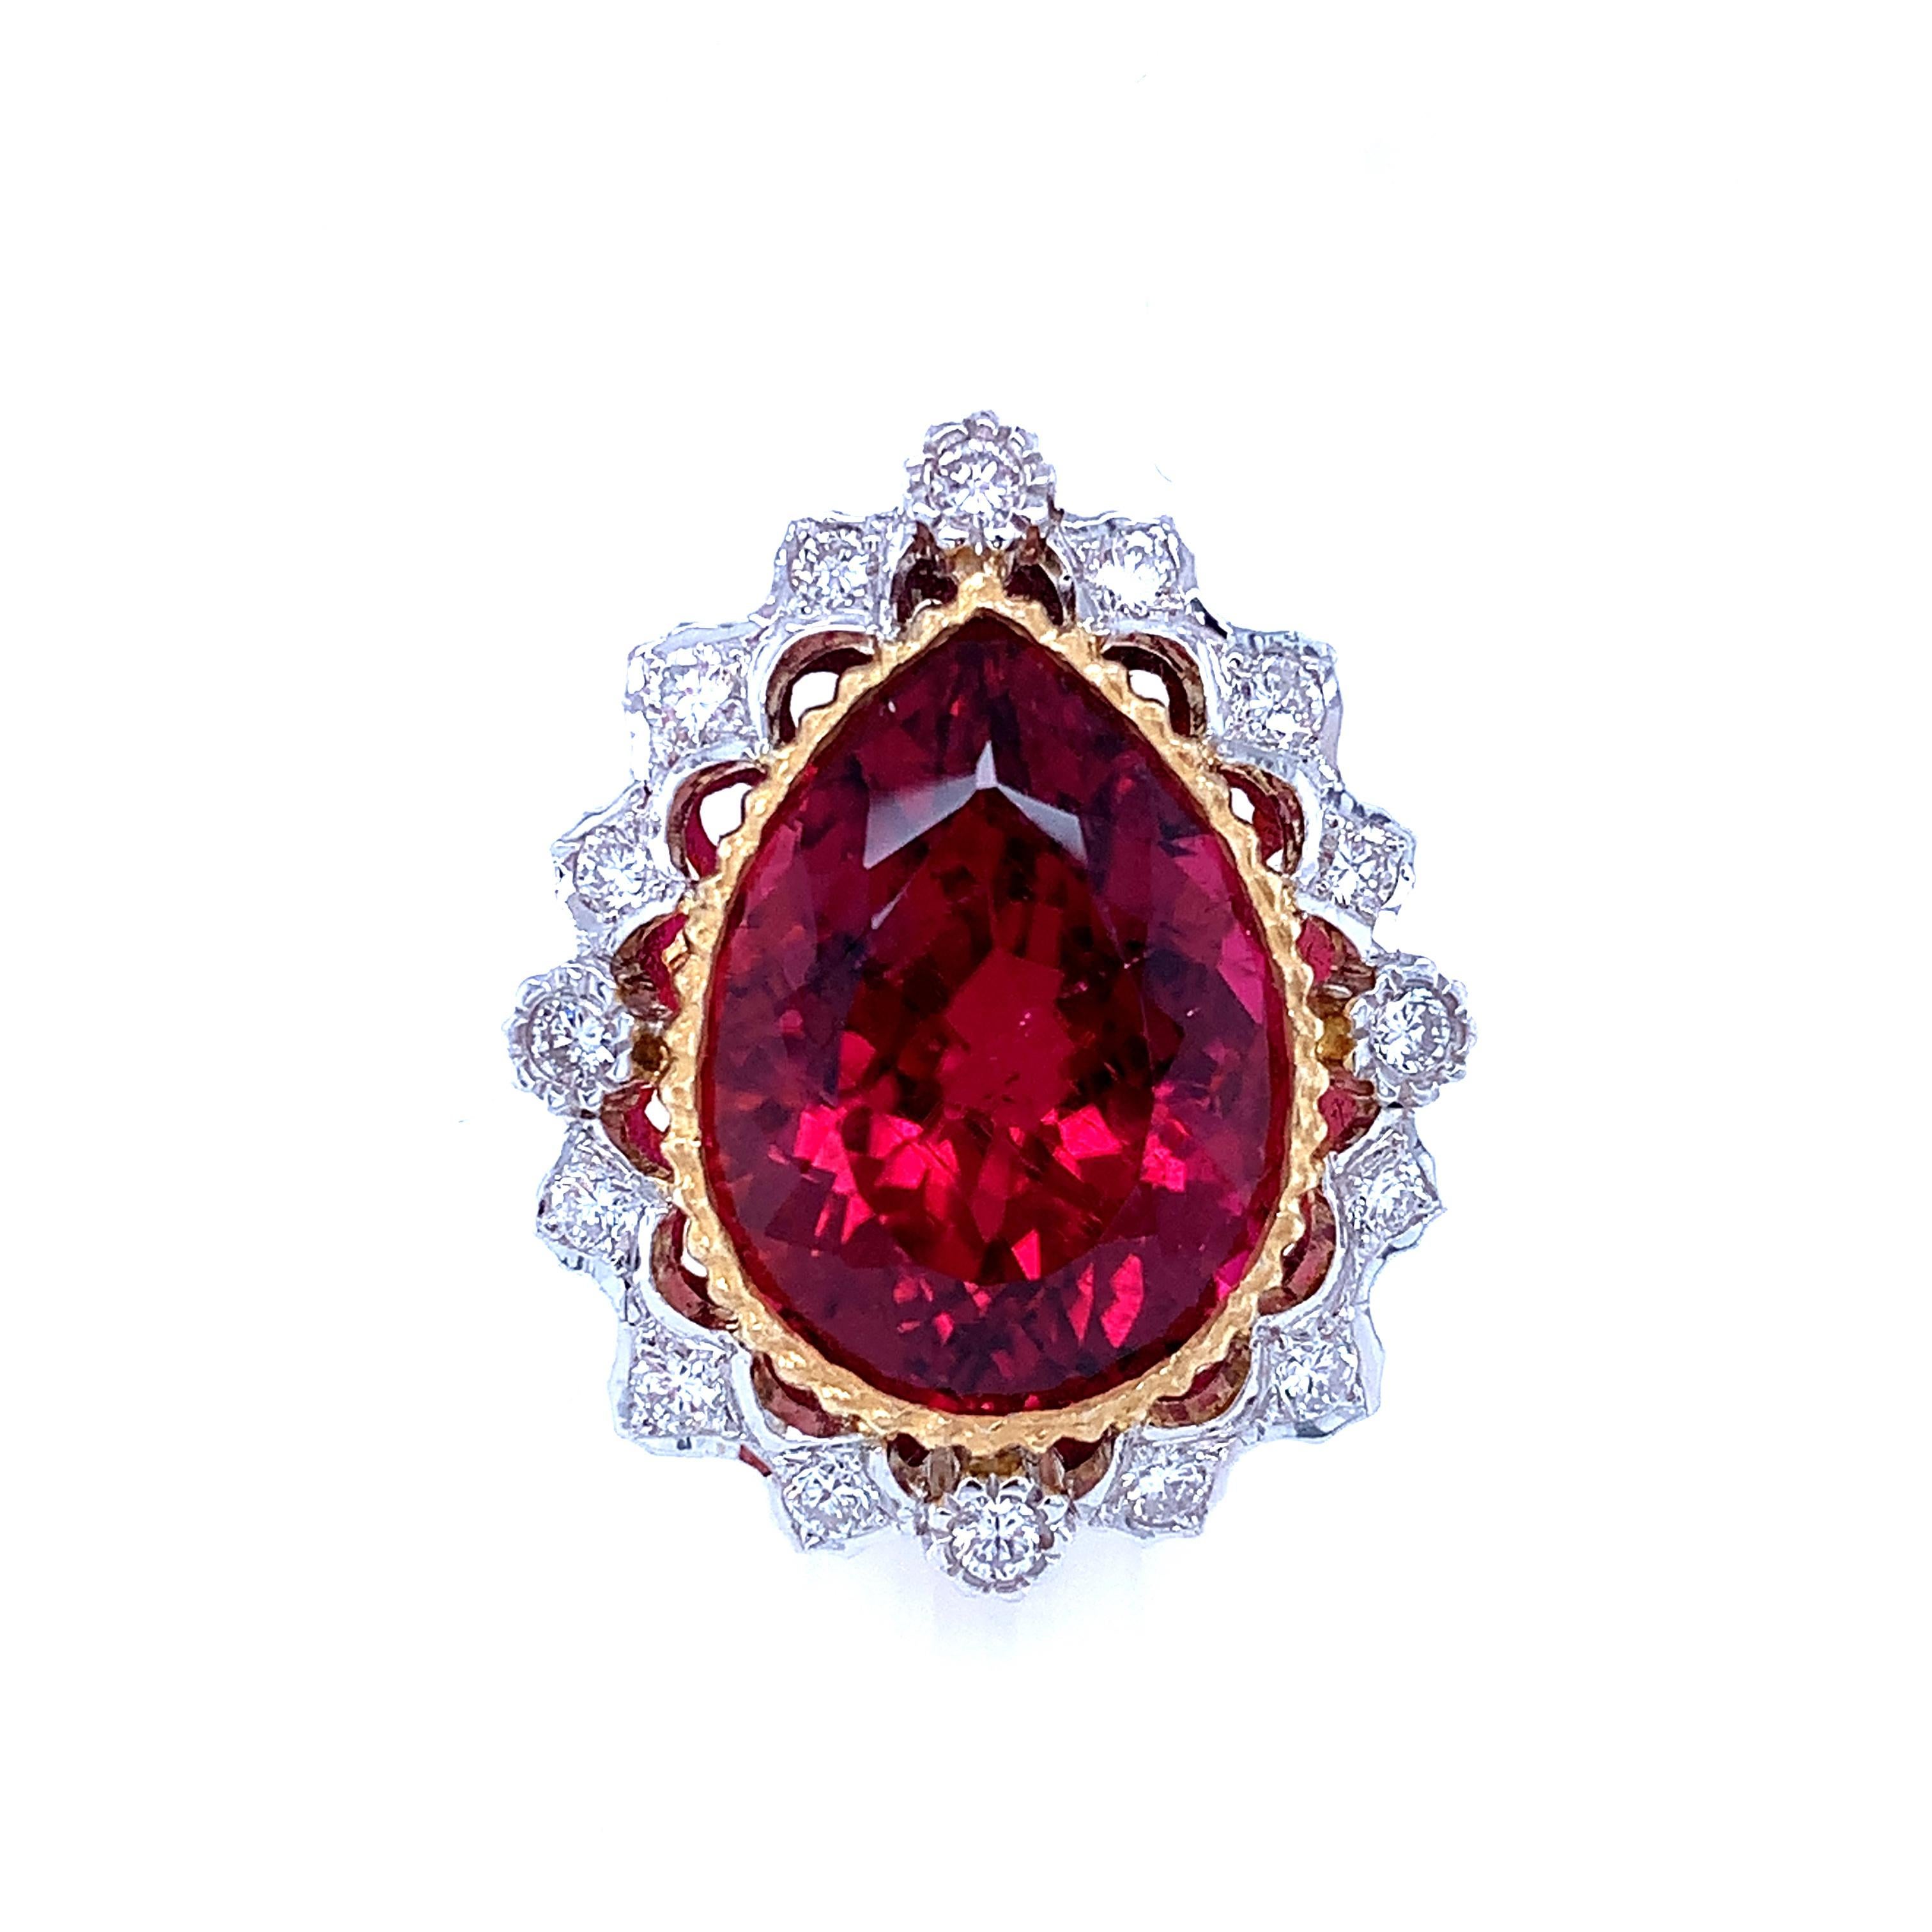 A gorgeous 14.58 carat pear-shaped rubellite tourmaline is featured in this stunning handmade 18k white and yellow gold cocktail ring. The tourmaline has excellent clarity and vivid fuchsia red color that is complemented beautifully by the intricate